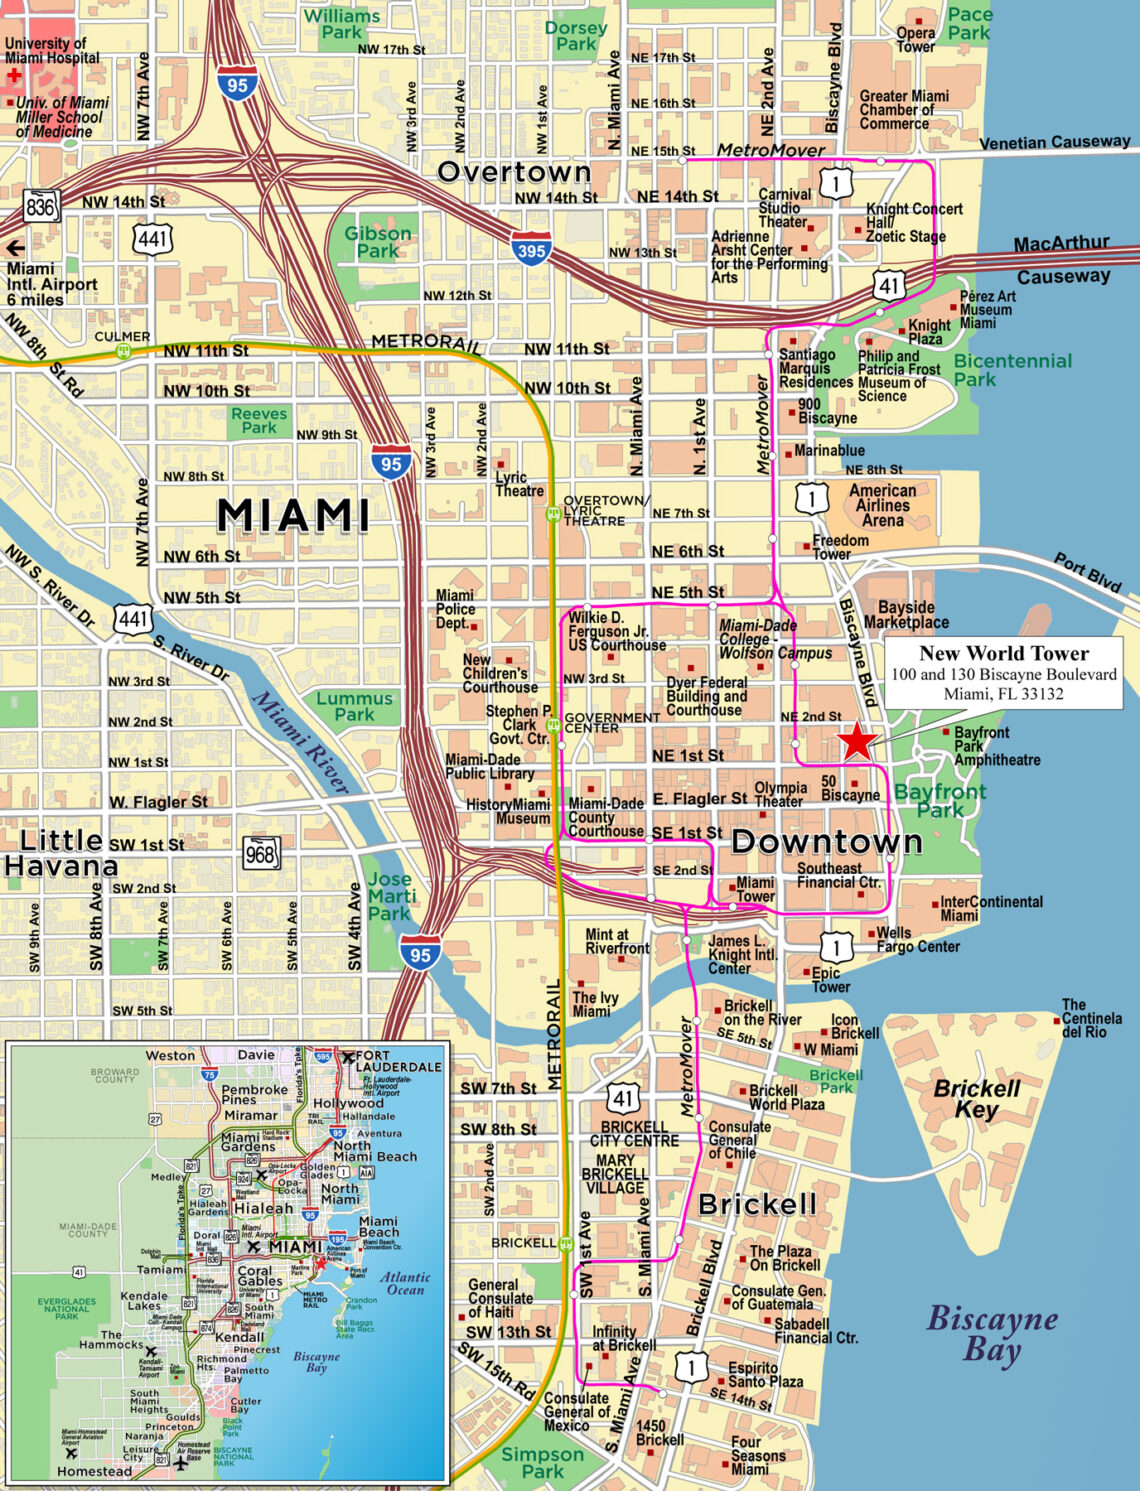 Custom Mapping & GIS Services in Miami, FL Area | Red Paw